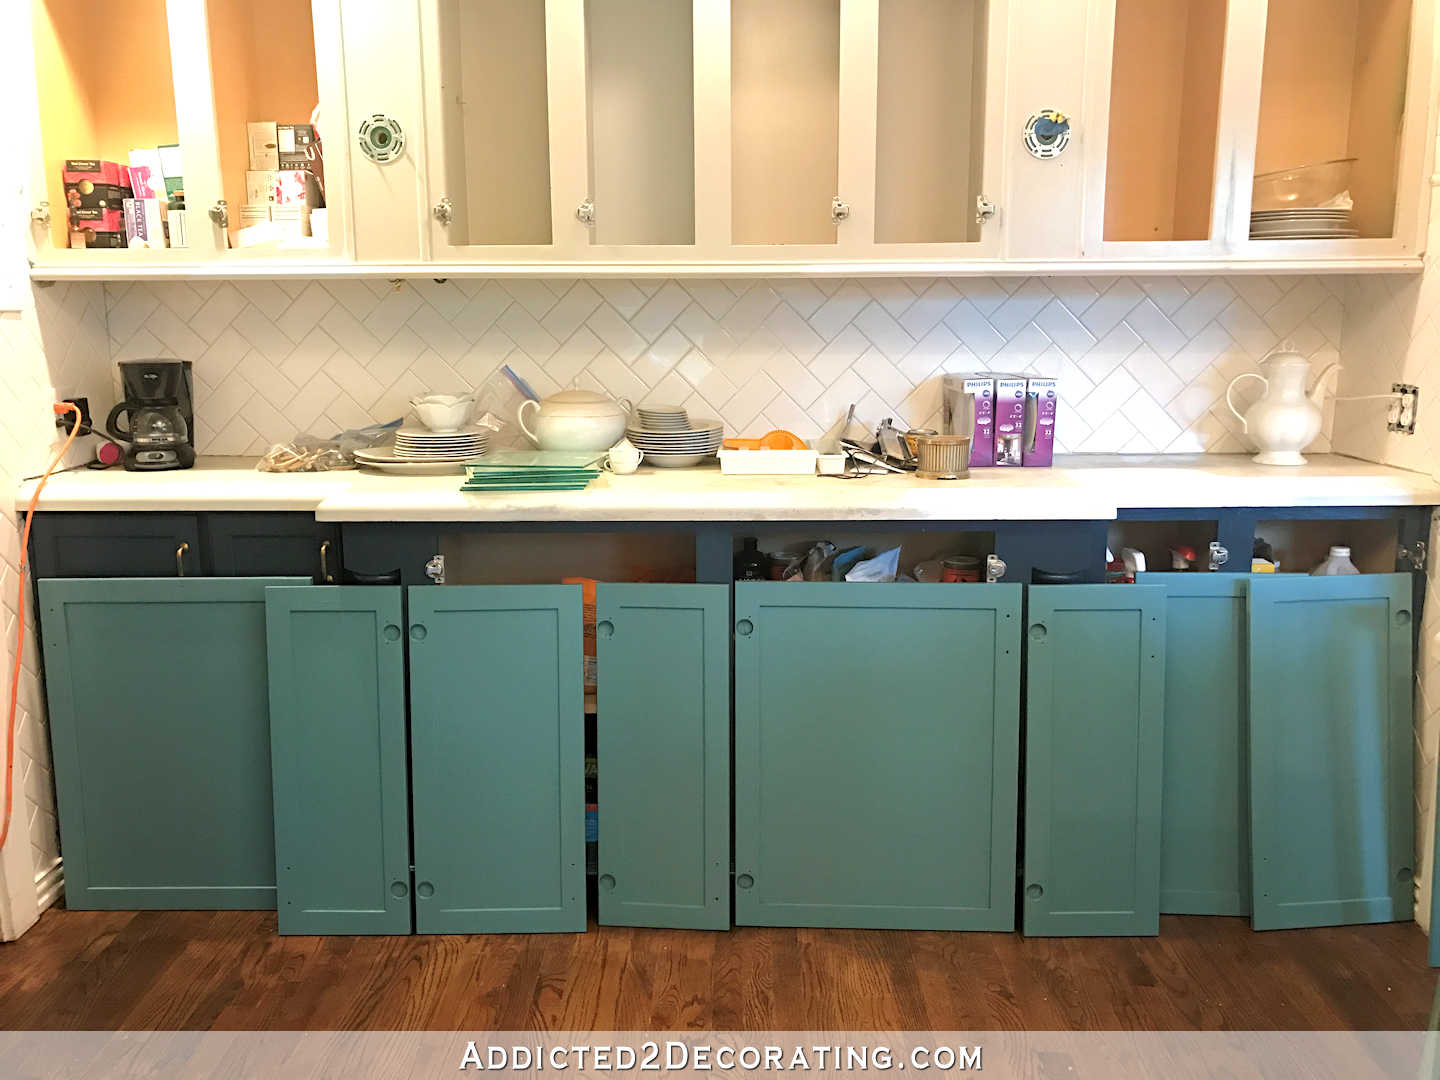 sneak peek - teal paint color for kitchen cabinets - backs of cabinet doors painted